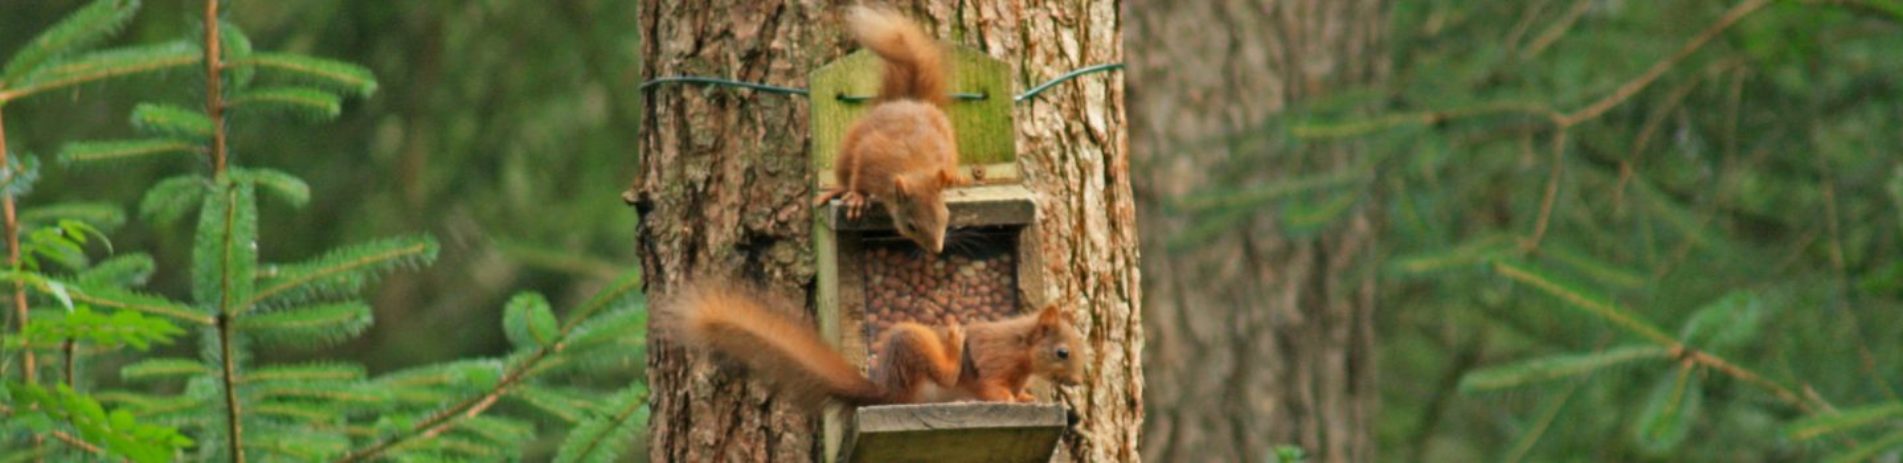 two-playful-red-squirrels-on-feeding-box-on-tree-trunk-with-forest-background